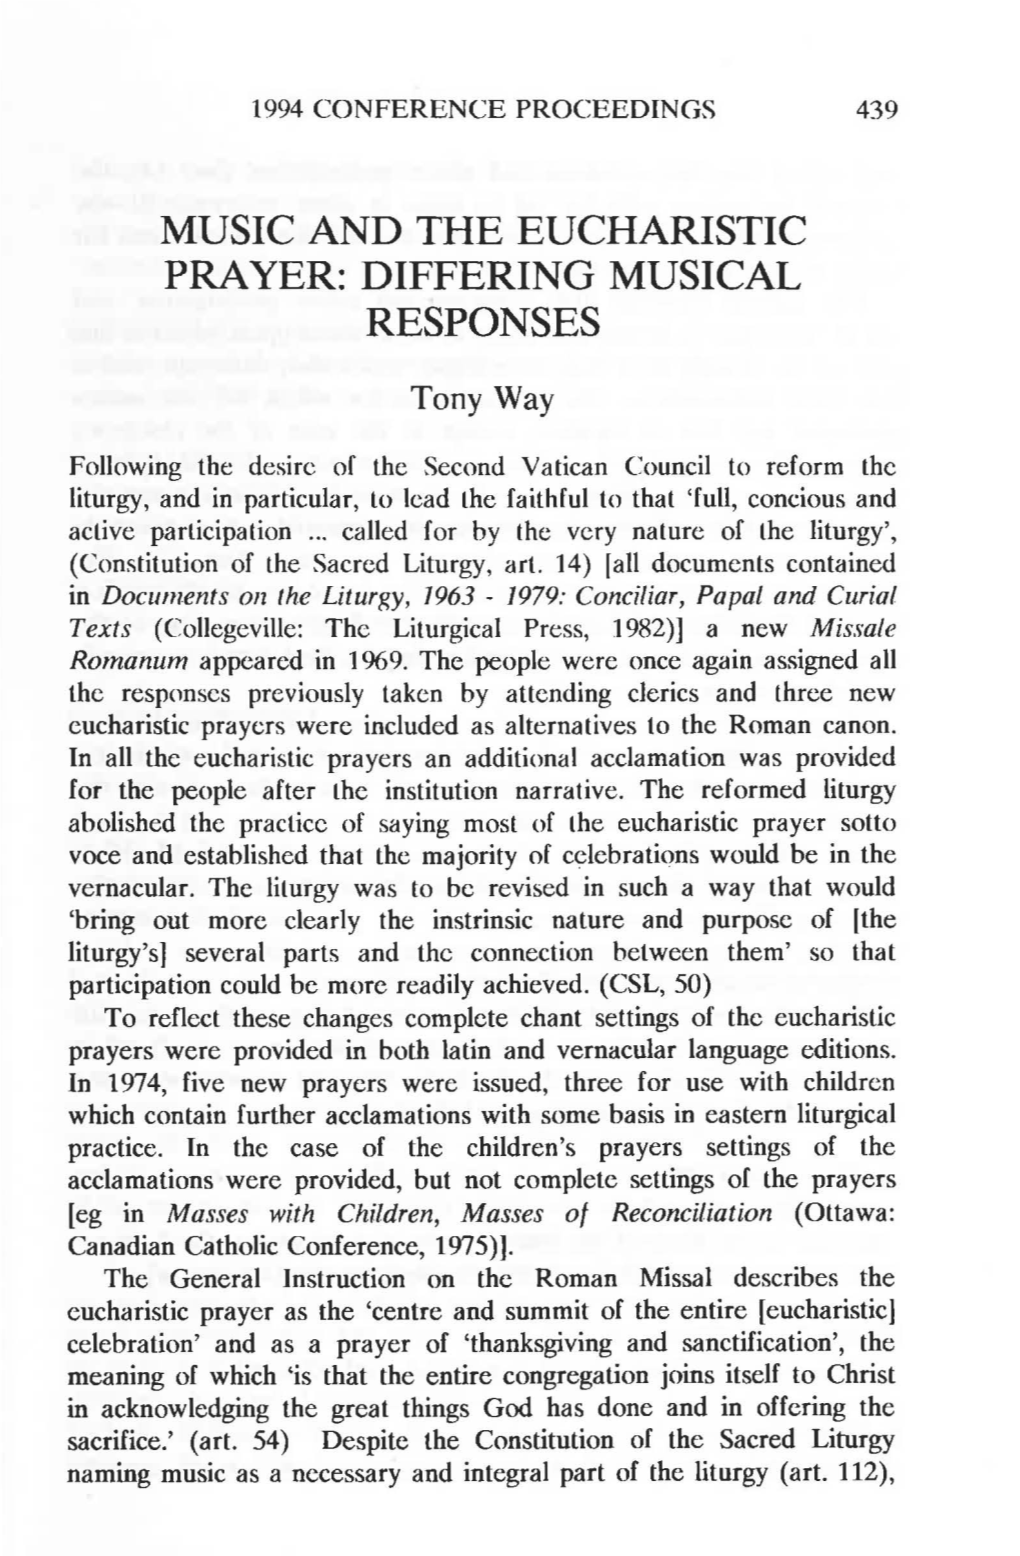 Music and the Eucharistic Prayer: Differing Musical Responses